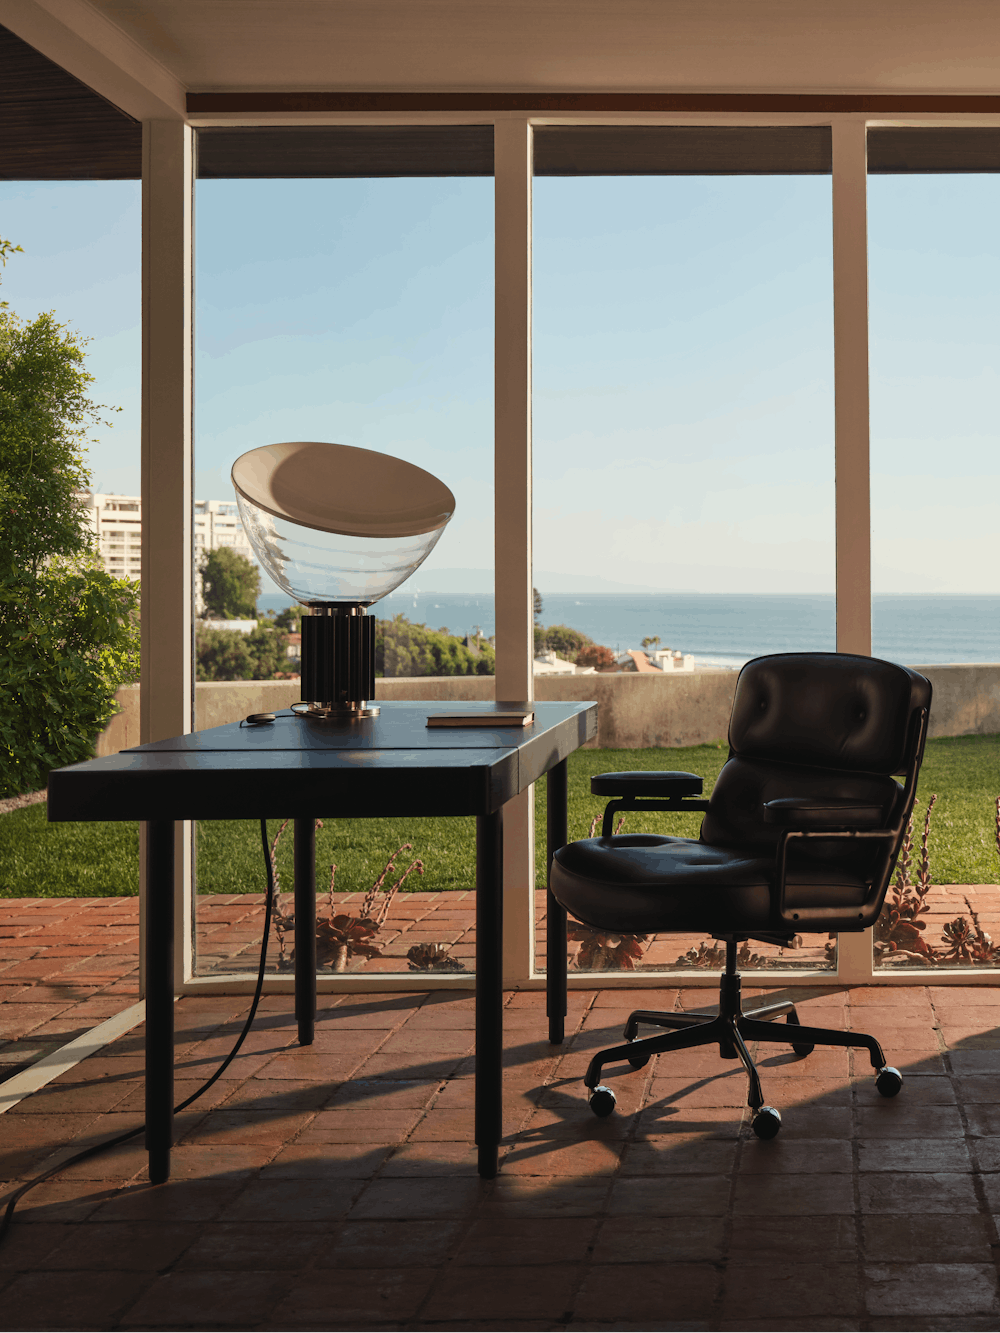 Eames Executive Chair and Leathwrap Desk